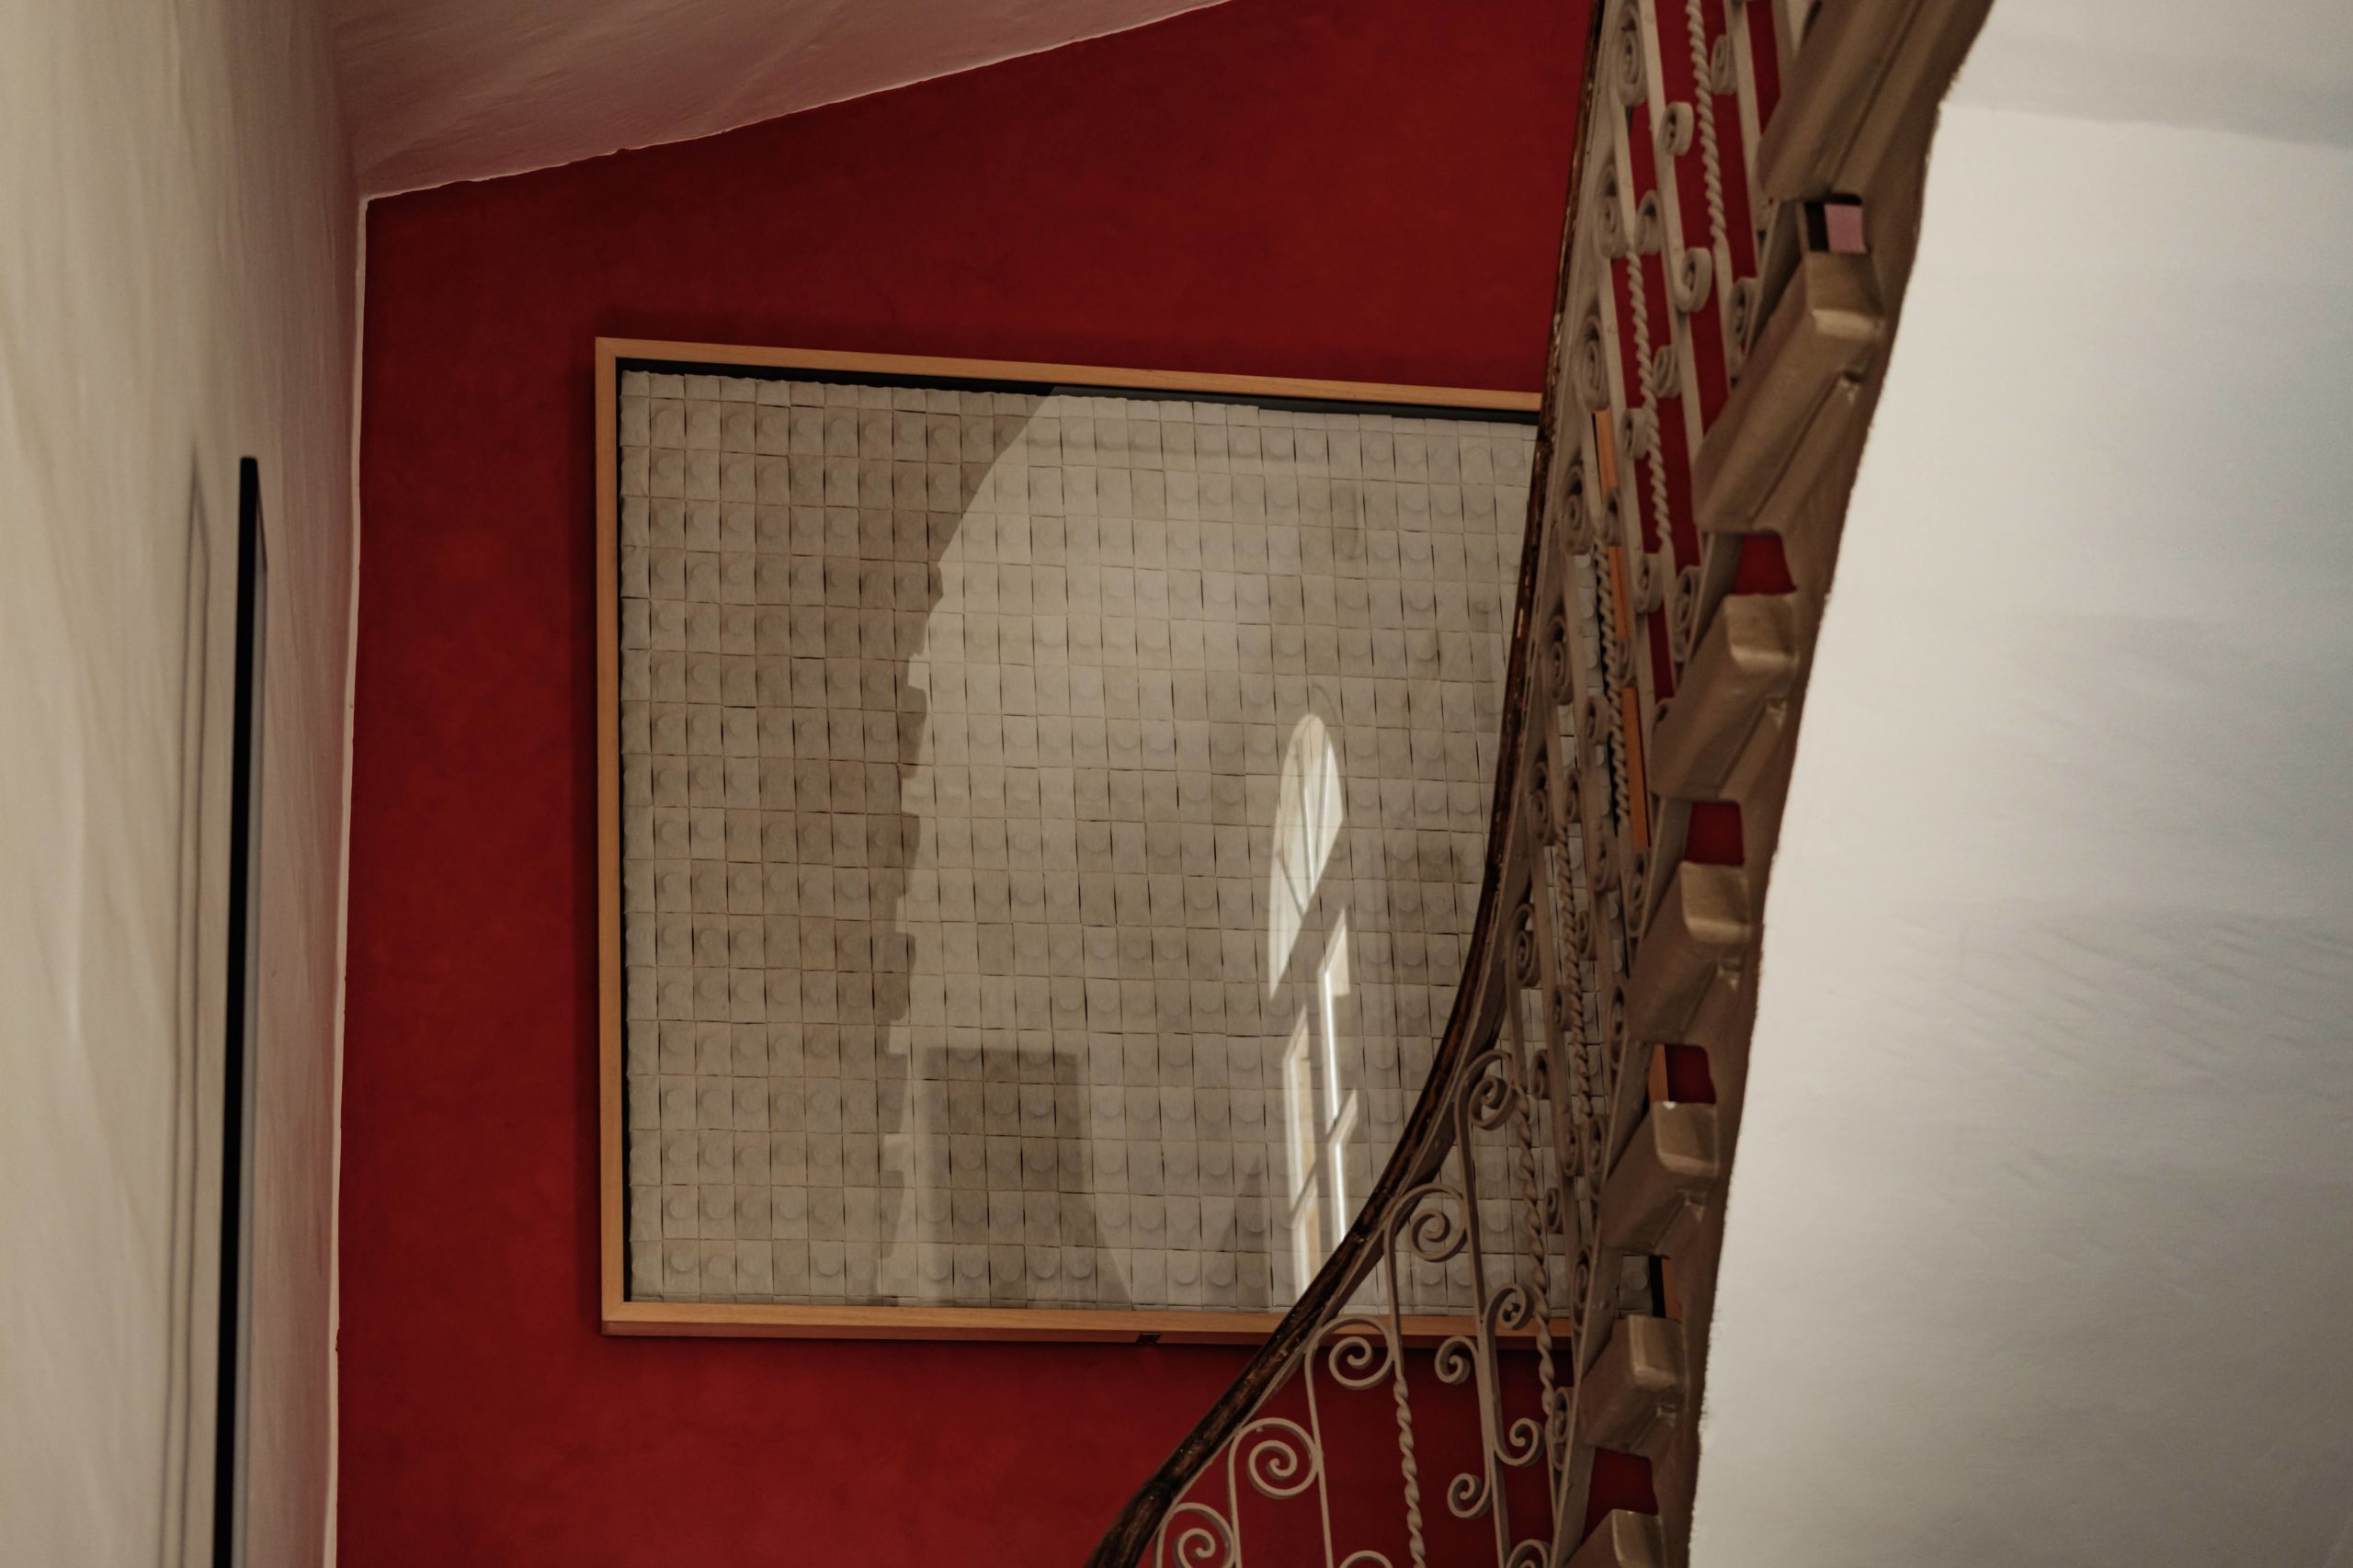 The Snop House staircase - Artwork by Maxine Attard - photograph by Brian Grech